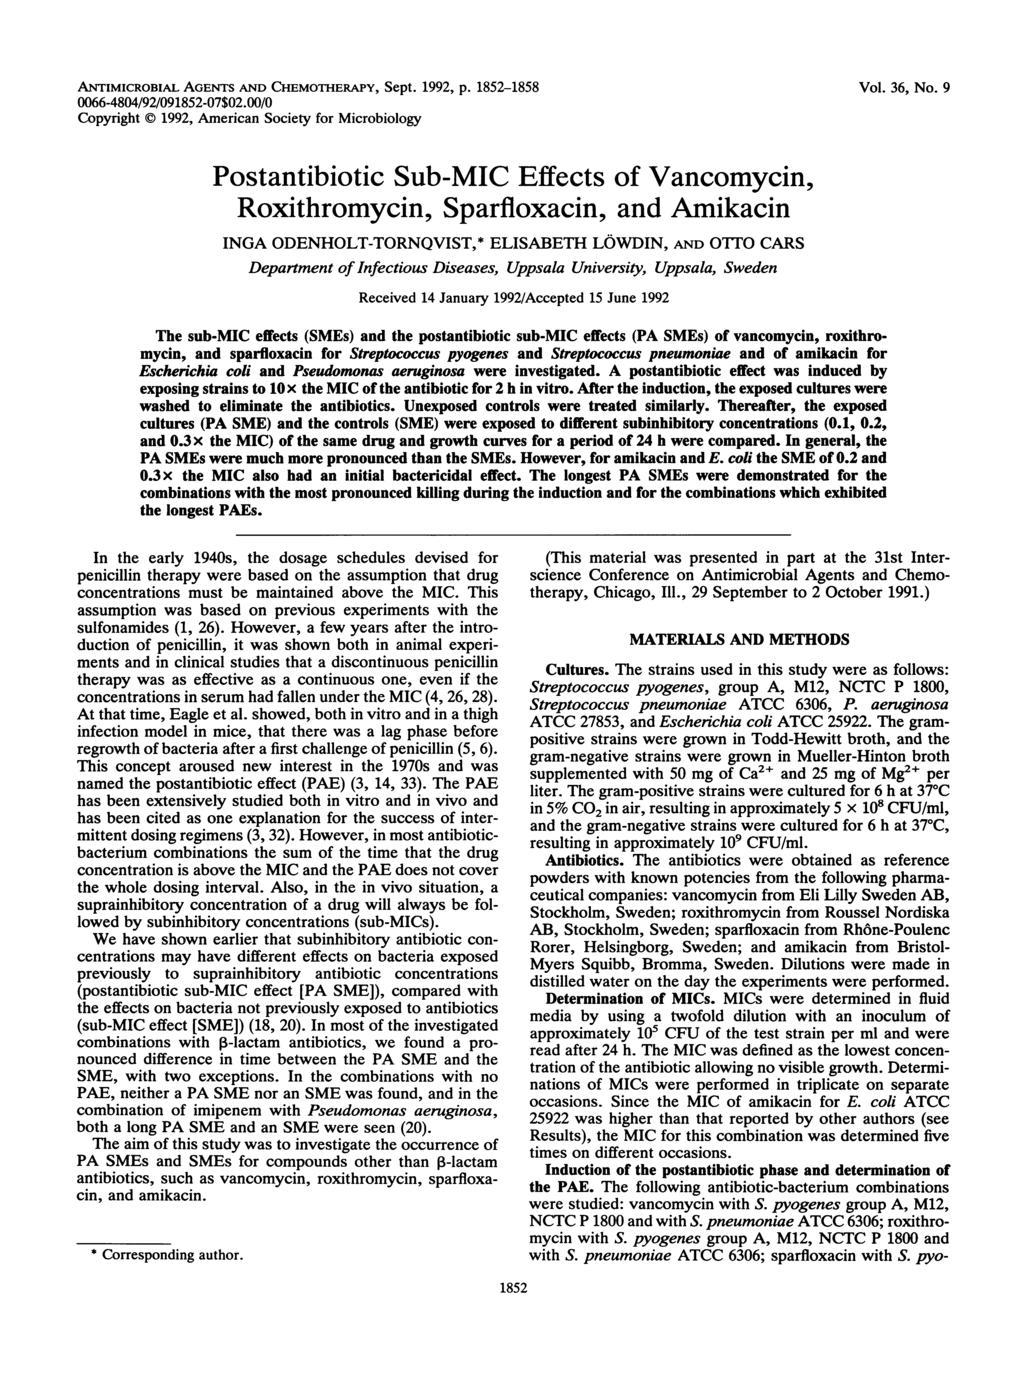 ANTIMICROBIAL AGENTS AND CHEMOTHERAPY, Sept. 1992, p. 1852-1858 0066-4804/92/091852-07$02.00/0 Copyright X) 1992, Americn Society for Microiology Vol. 36, No.